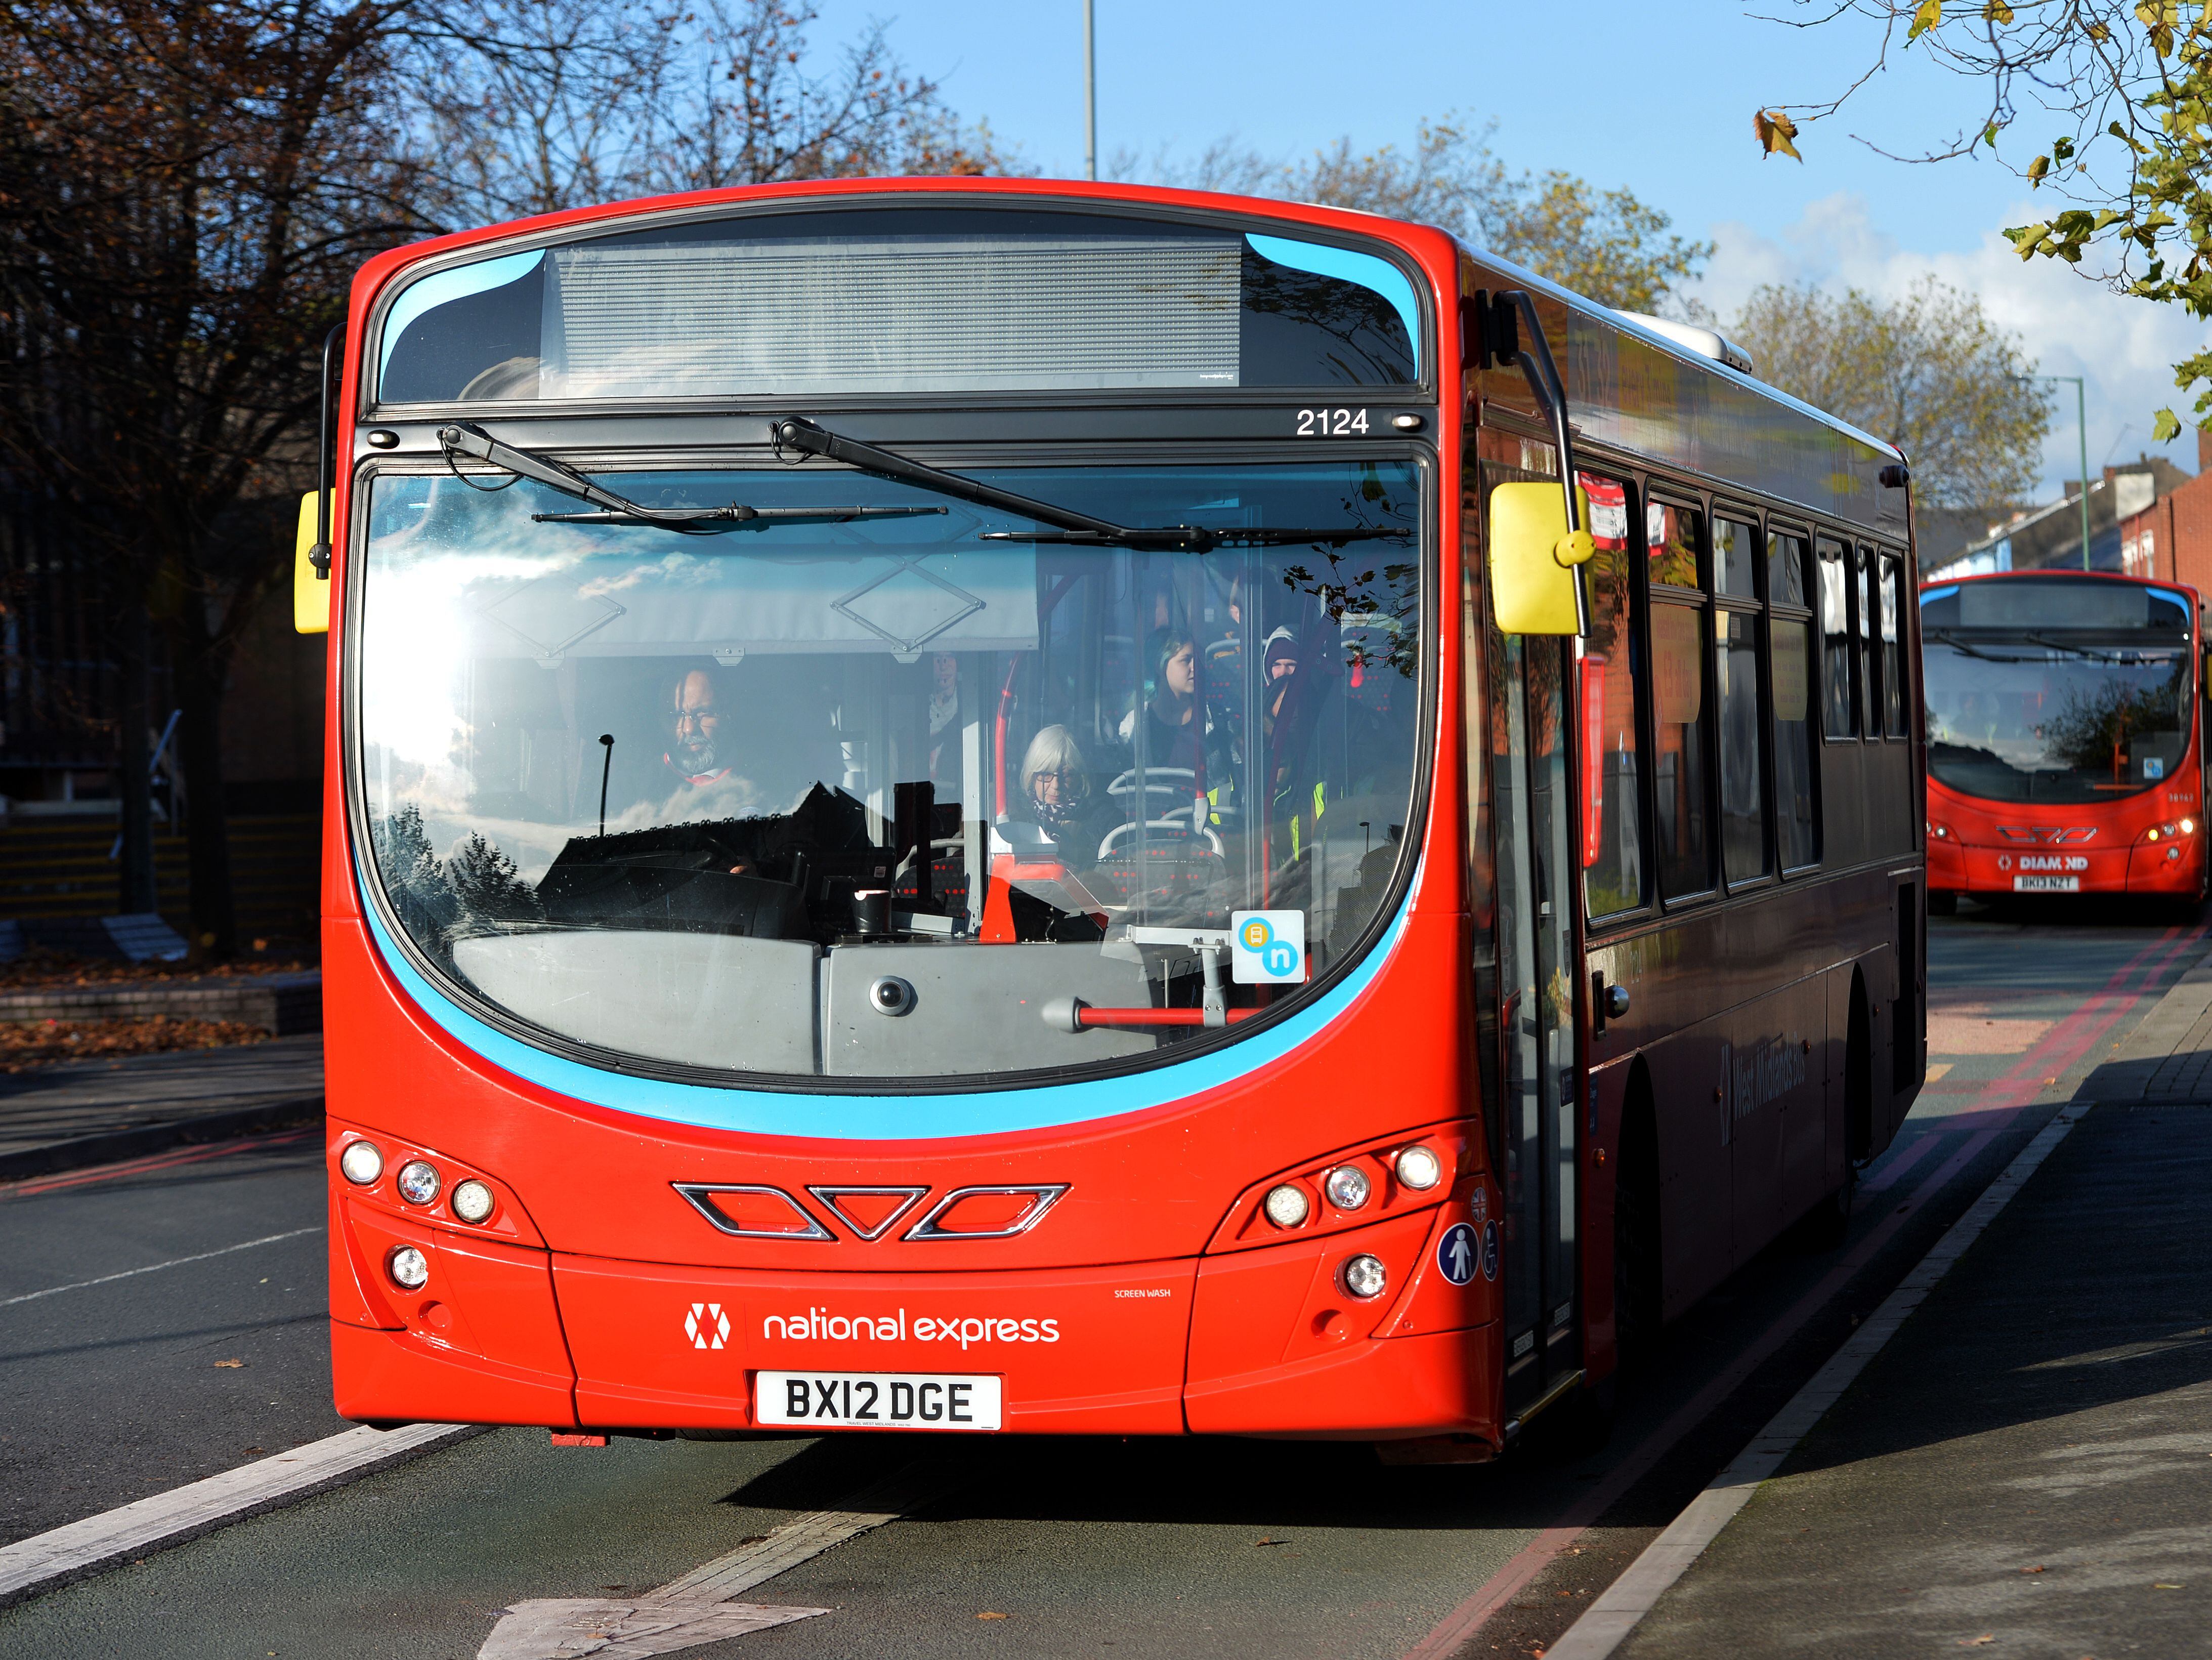 Bus charter is enhanced to improve conditions for passengers across the West Midlands